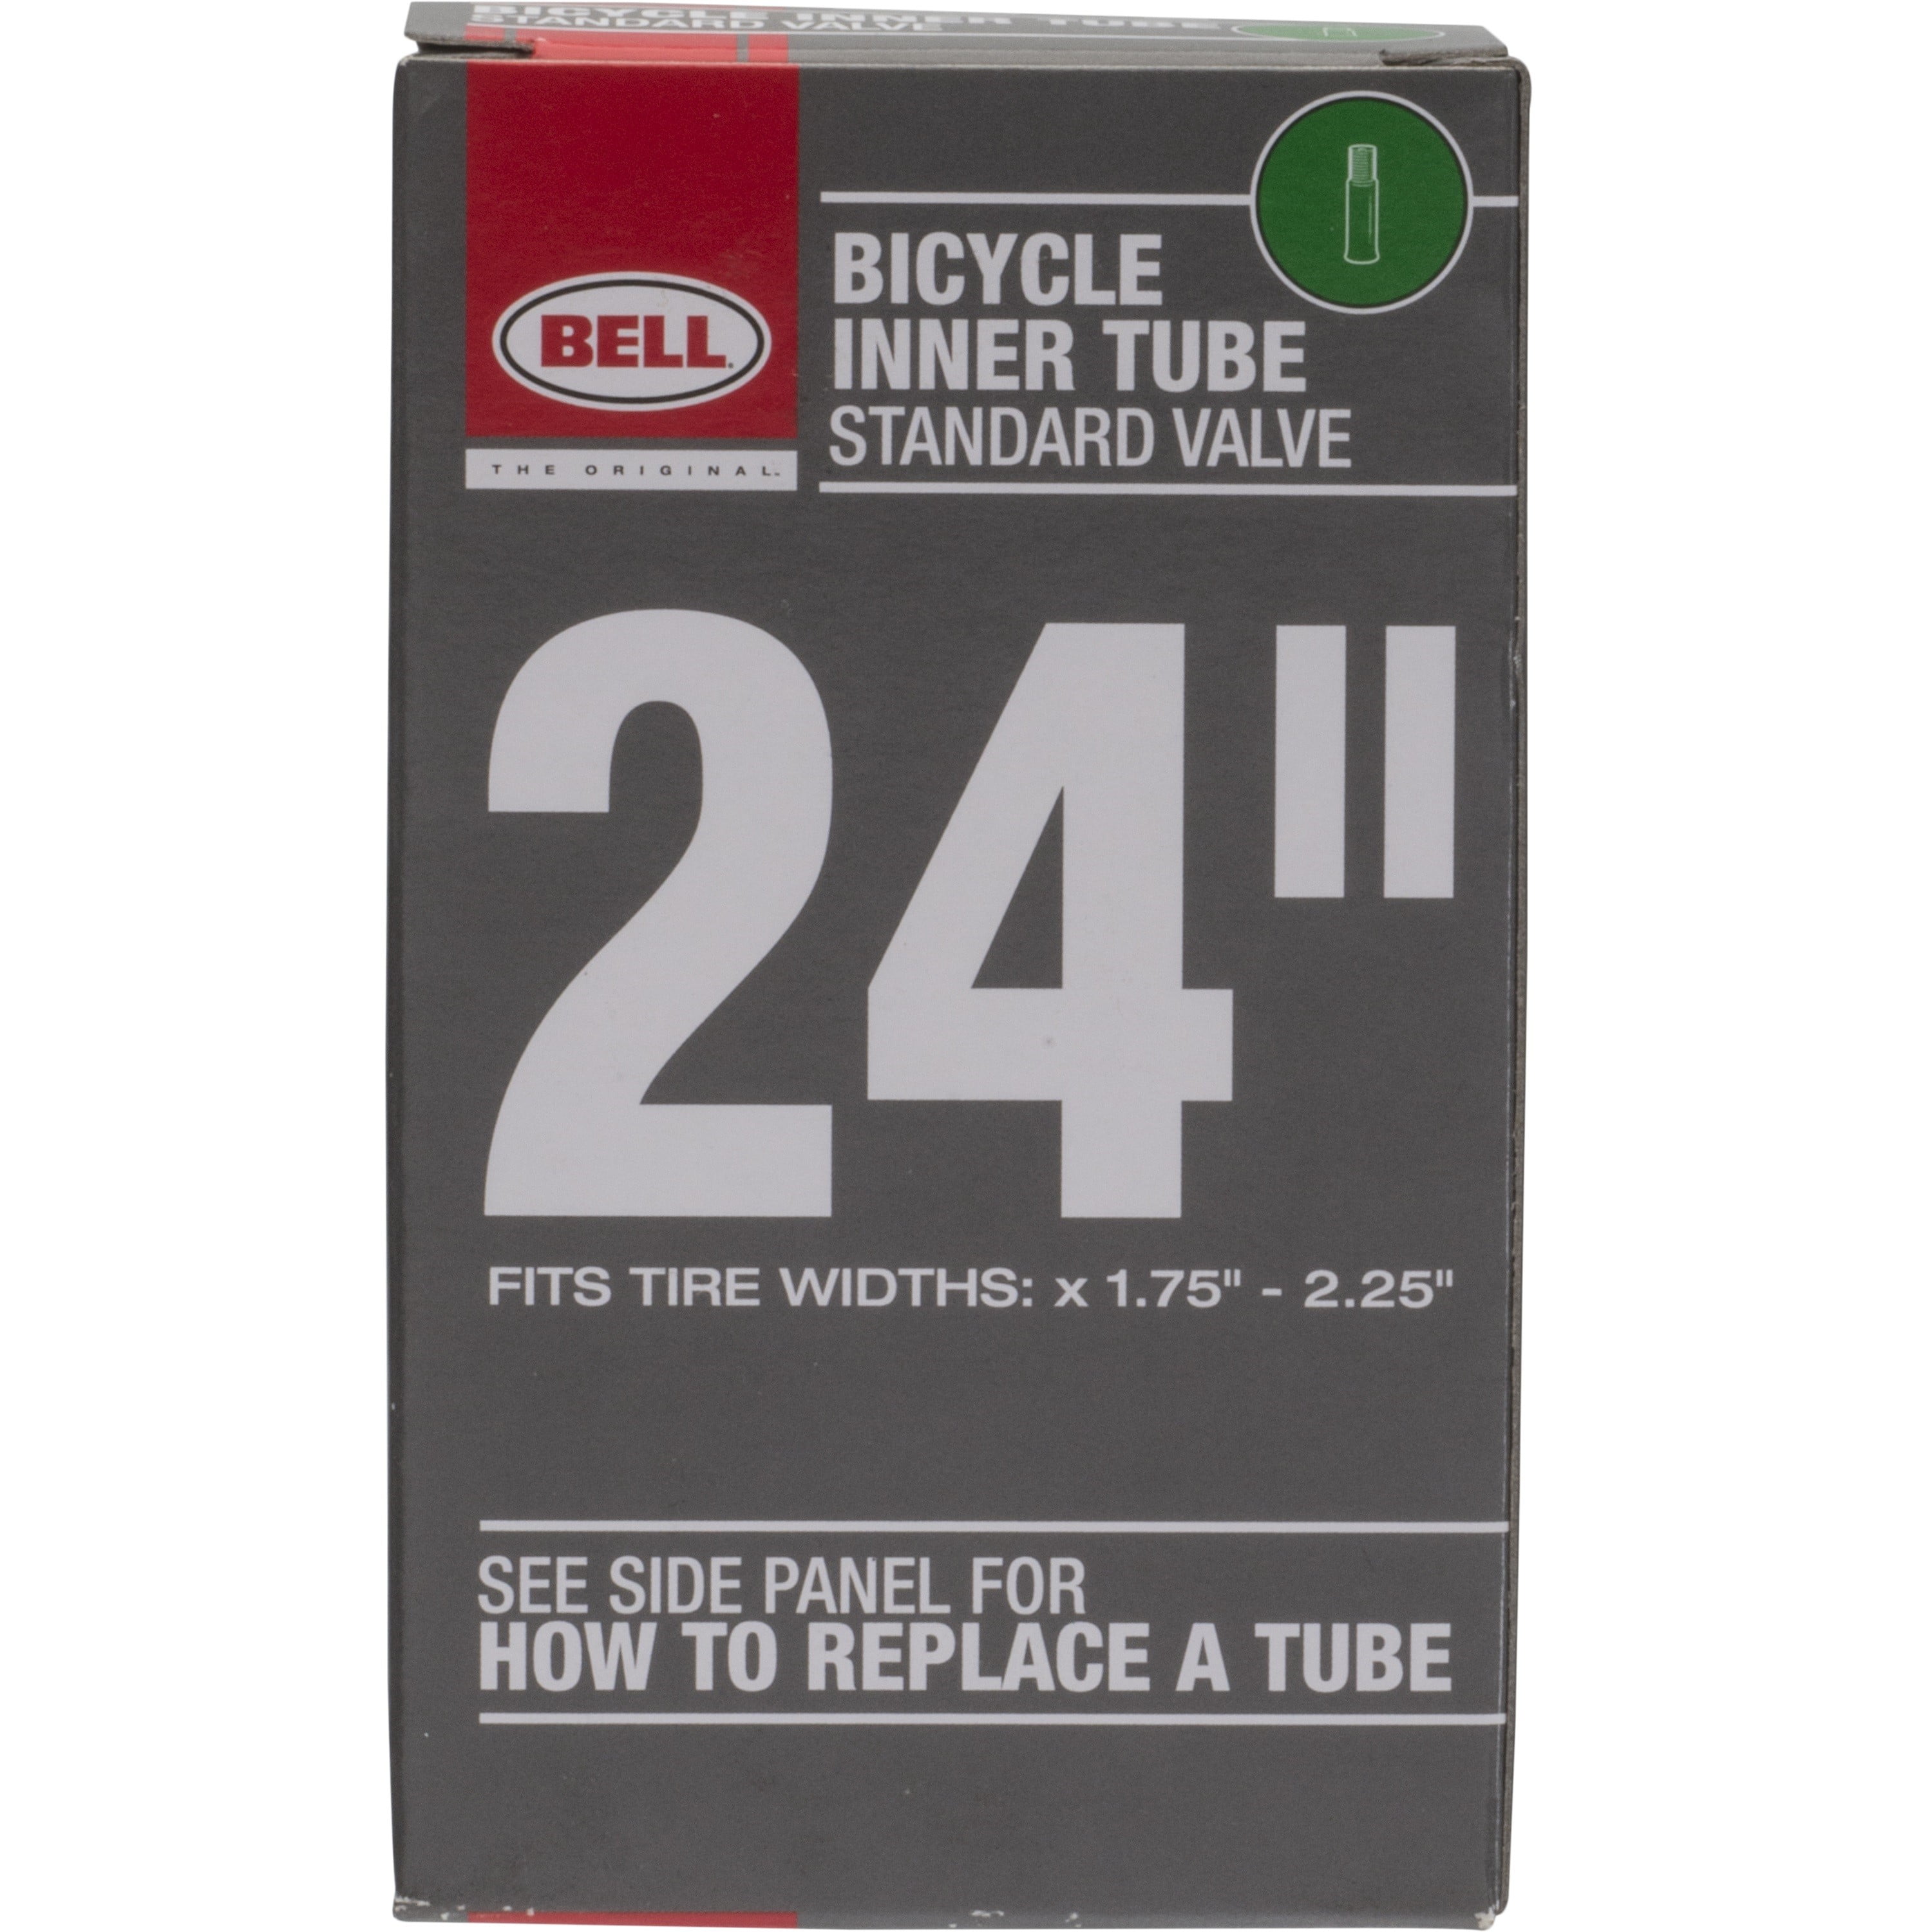 Schrader bicycle cycle tire inner tube 24 x 1 3/8 